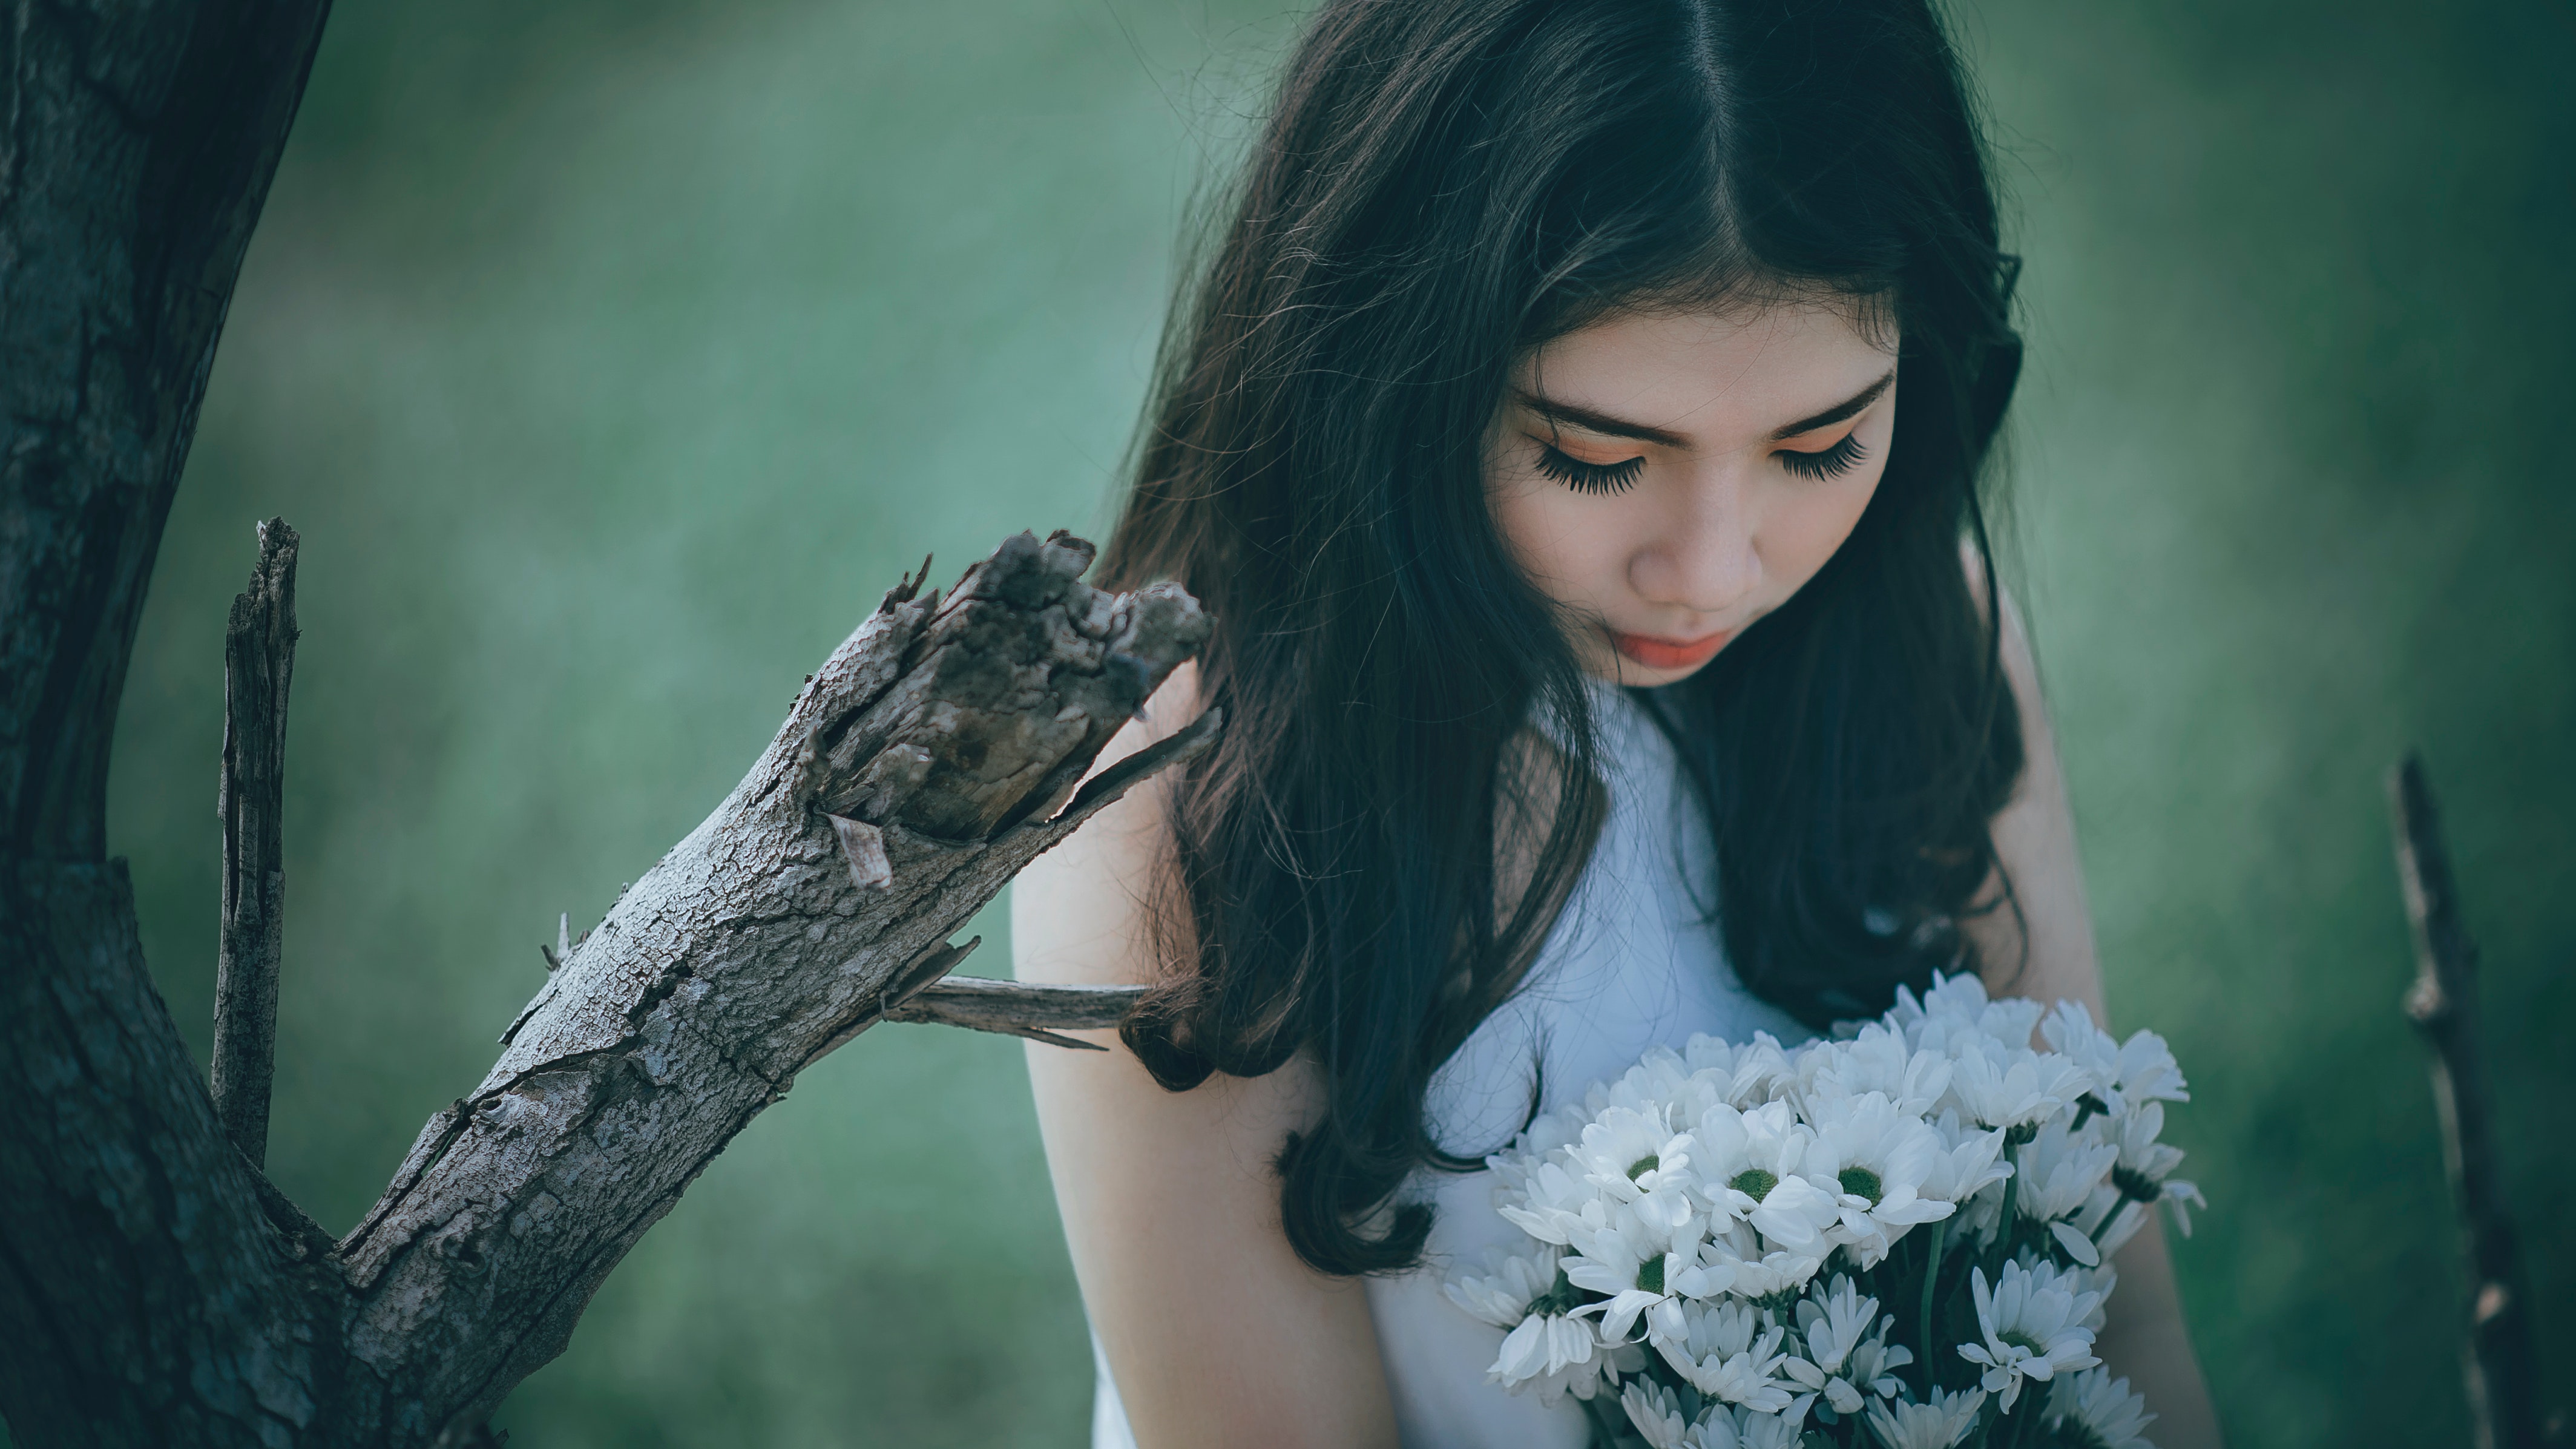 Woman wearing white halter top holding white flower bouquet photo